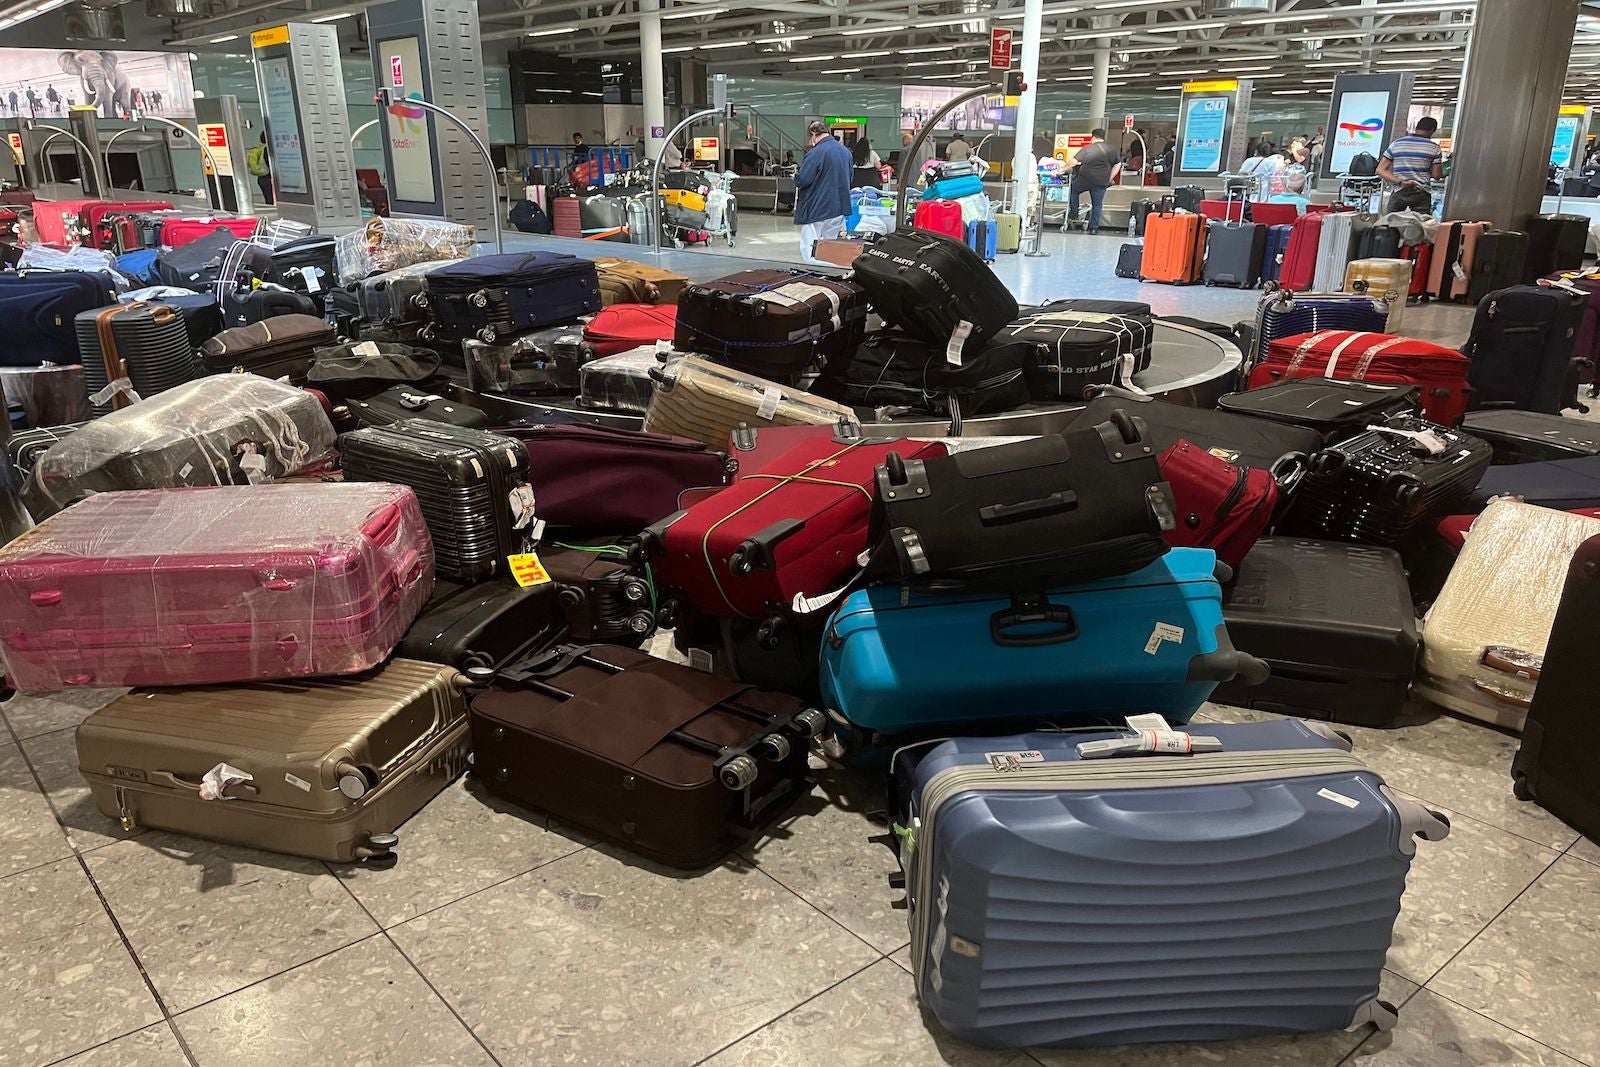 a disorganized pile of suitcases at baggage claim